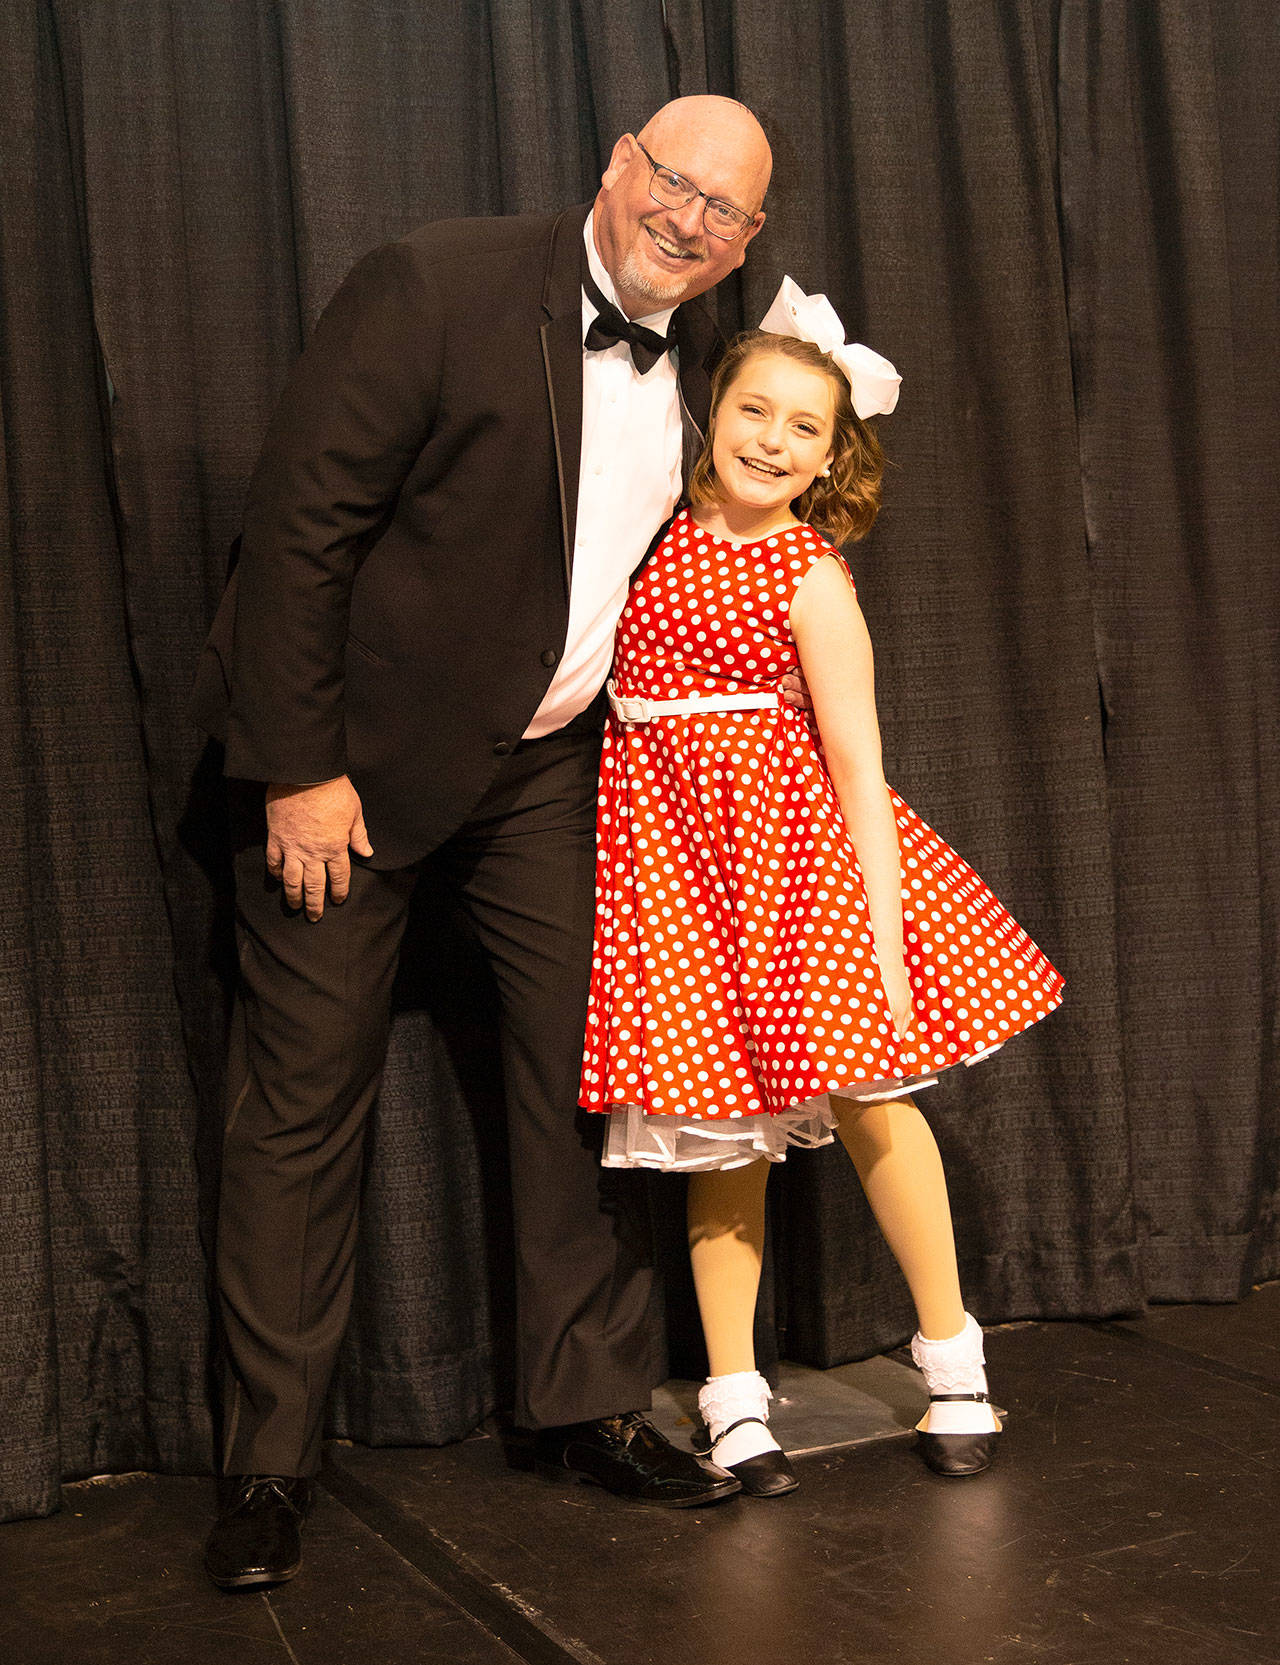 Celebrity dancers raised $11,585. The winning team was Brian Chandler, UGM Outreach director and 10-year-old Allegro Performing Arts Academy student Sophina. COURTESY, Emma Lee Photography